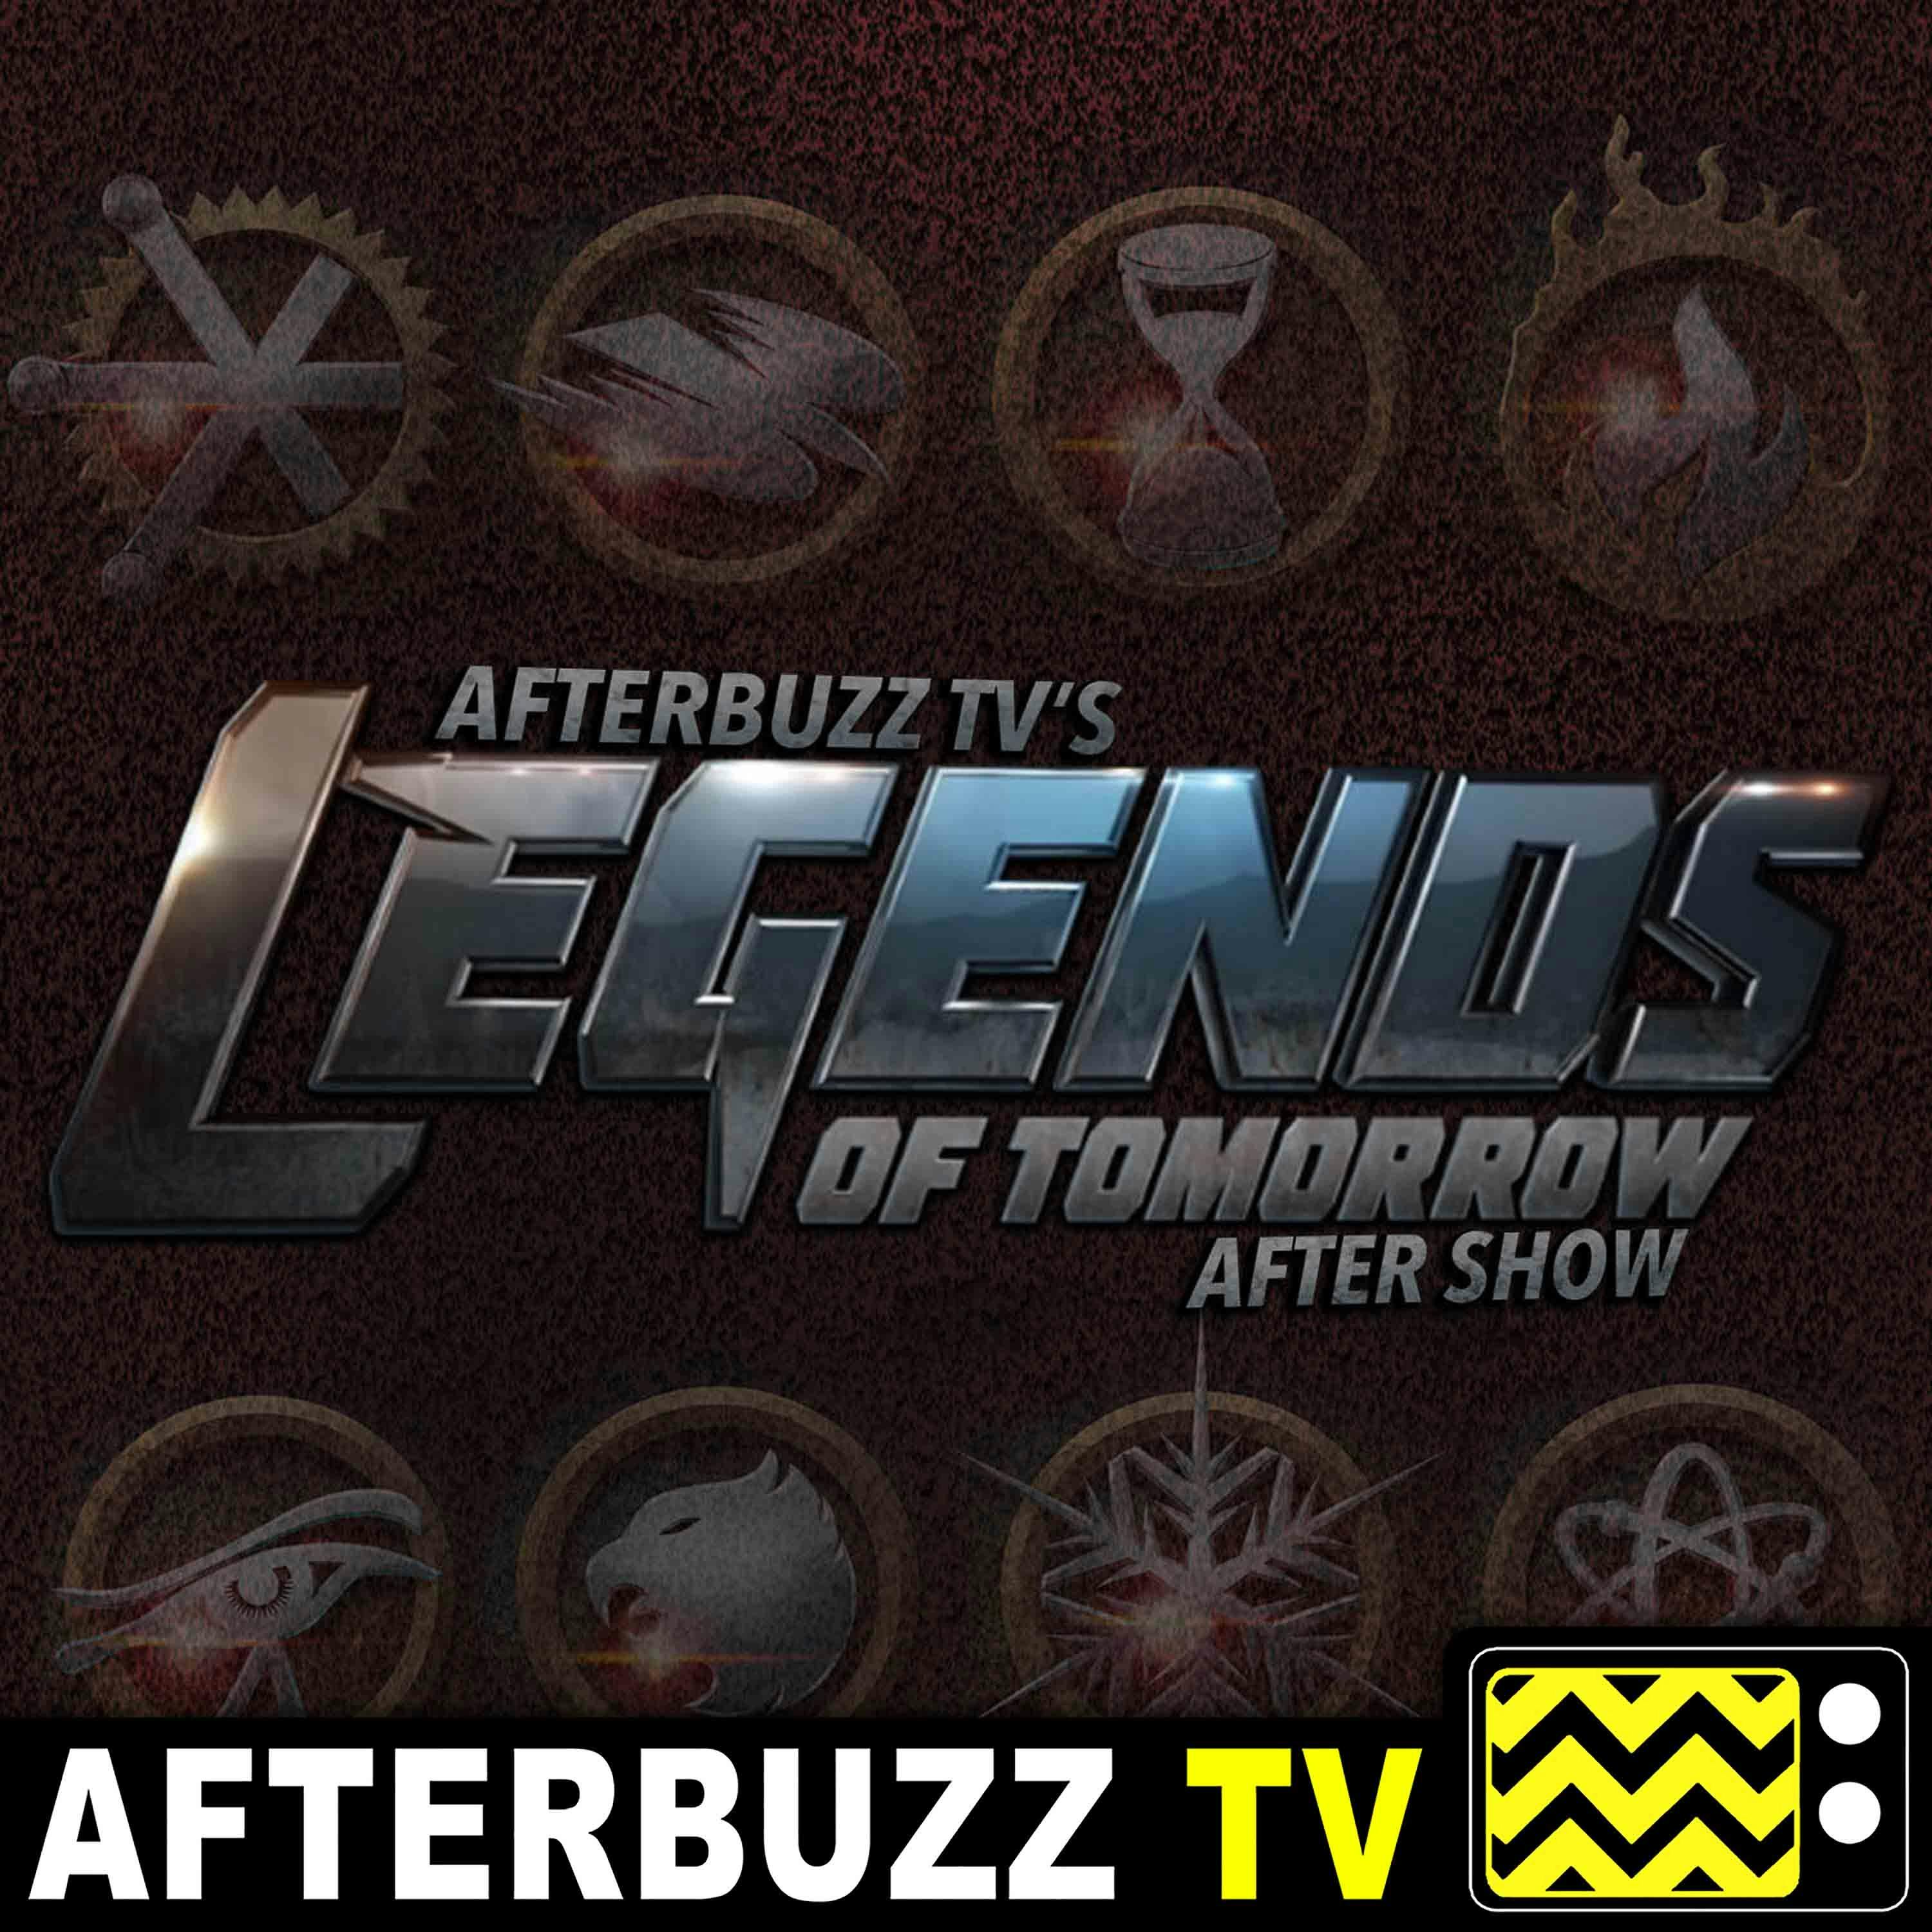 Legends Of Tomorrow S:3 | Guest Starring John Noble E:17 | AfterBuzz TV AfterShow